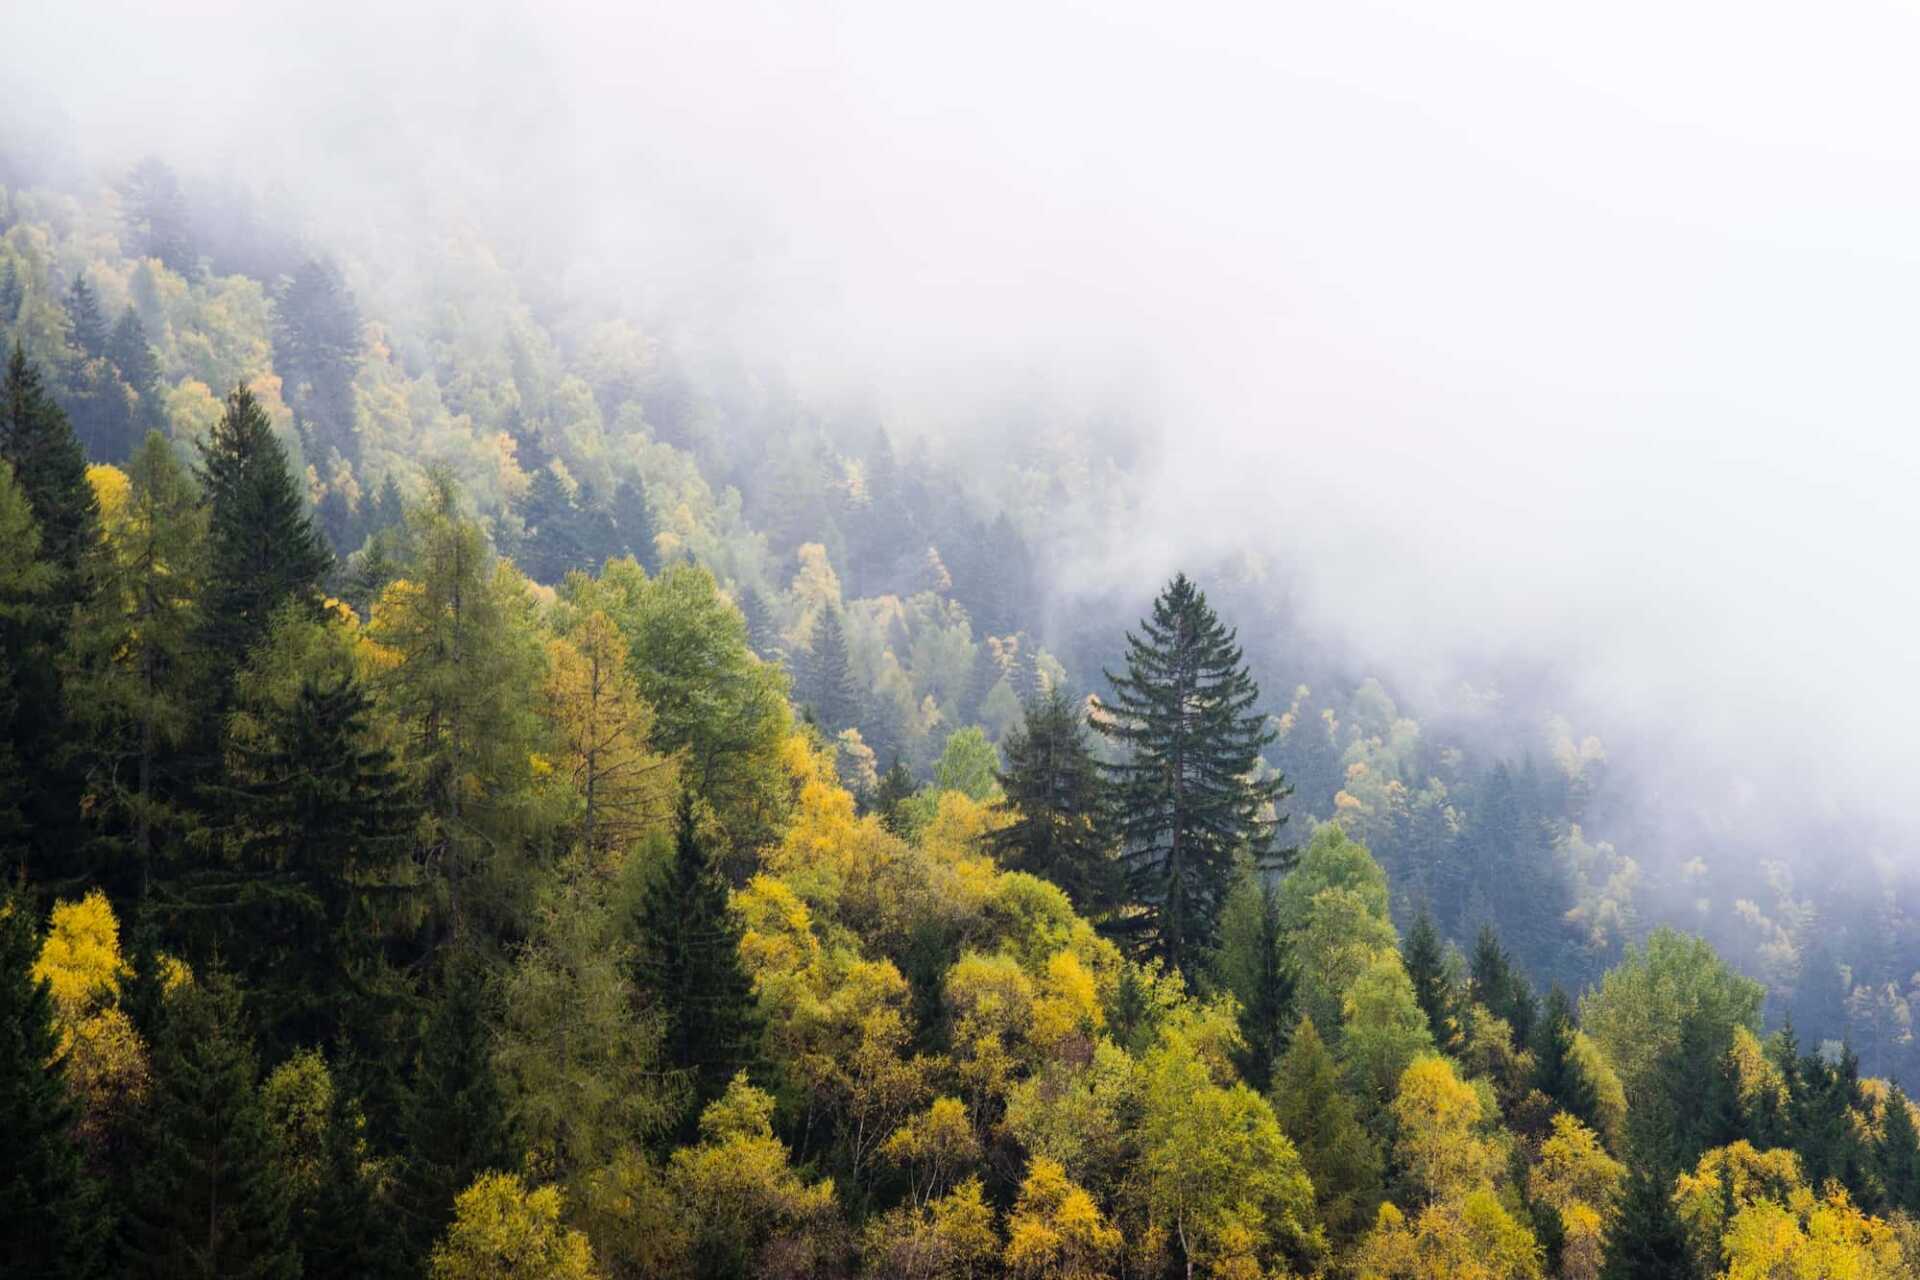 Mountainside trees in the mist, seen from above